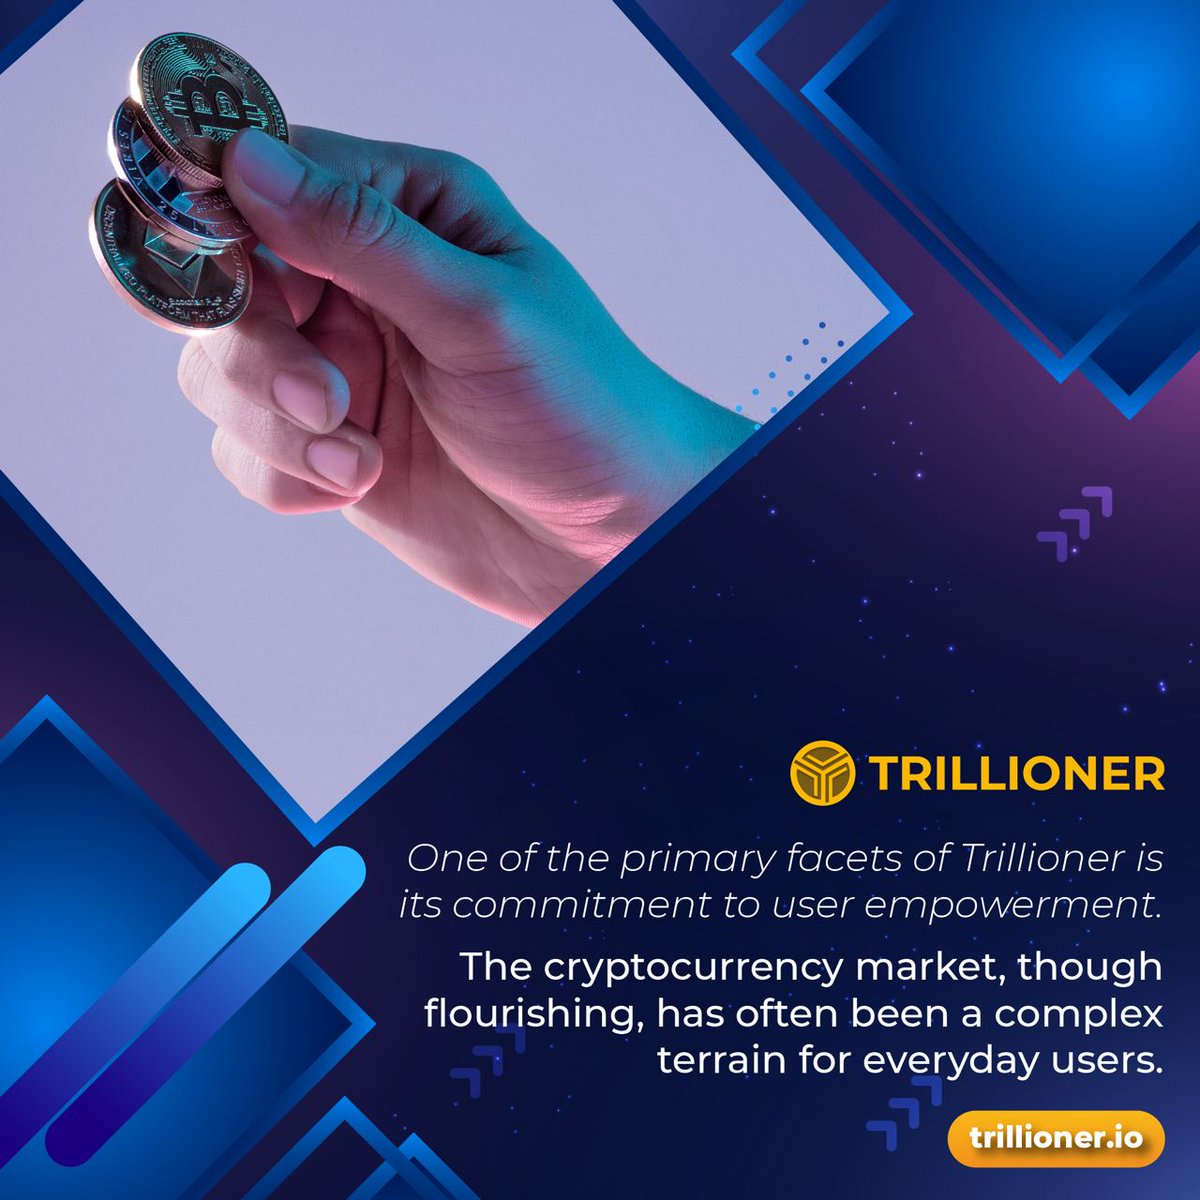 One of the primary facets of Trillioner is its commitment to user empowerment.

#TLC #Trillioner #cryptocurrency #cryptonews #cryptotrading #Blockchain #metaverse #blockchainnews #BlockchainInnovation